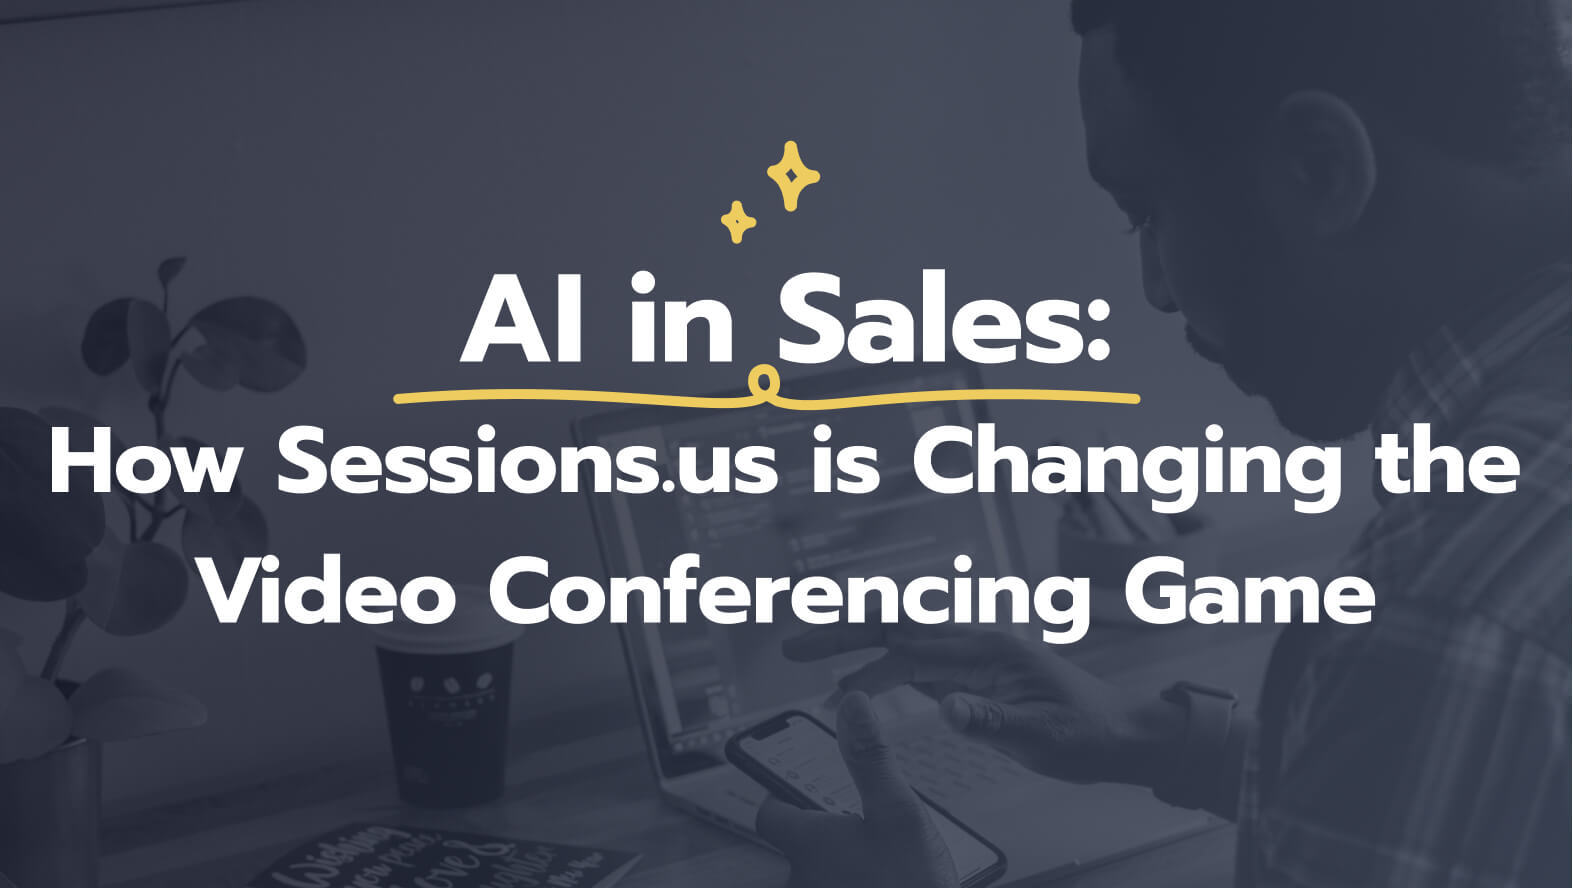 changing the video conferencing game with AI in sales